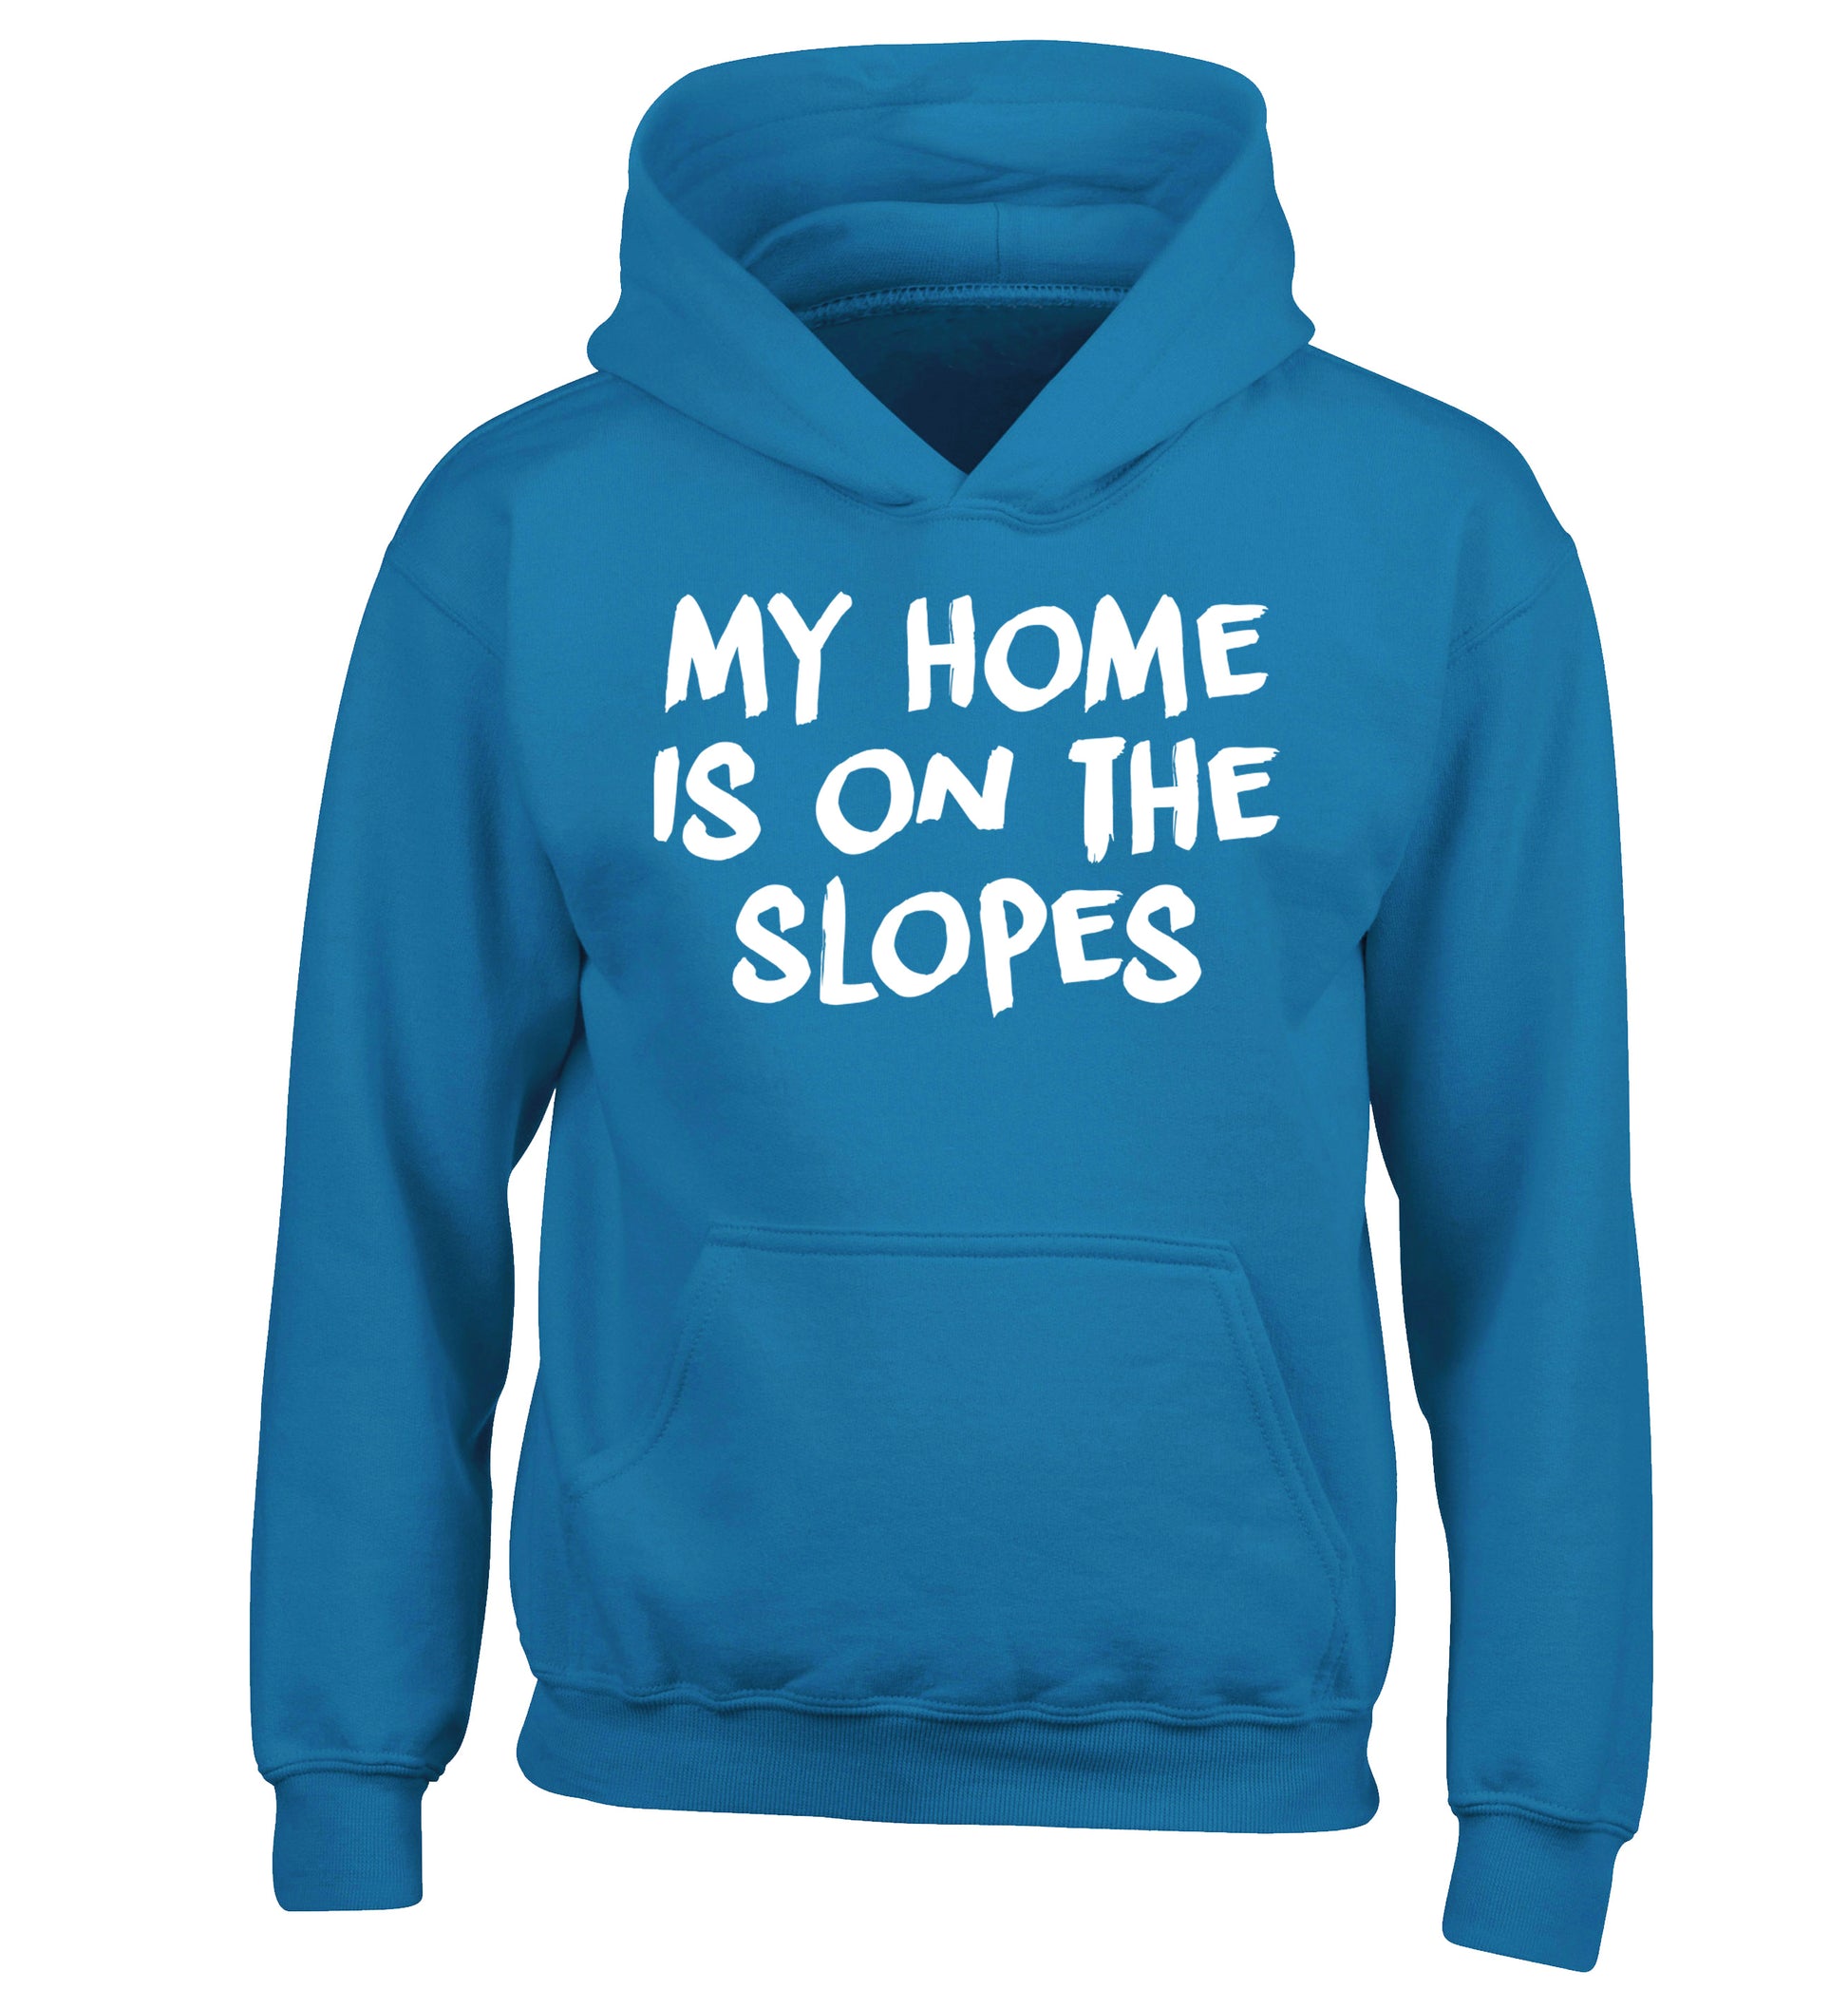 My home is on the slopes children's blue hoodie 12-14 Years